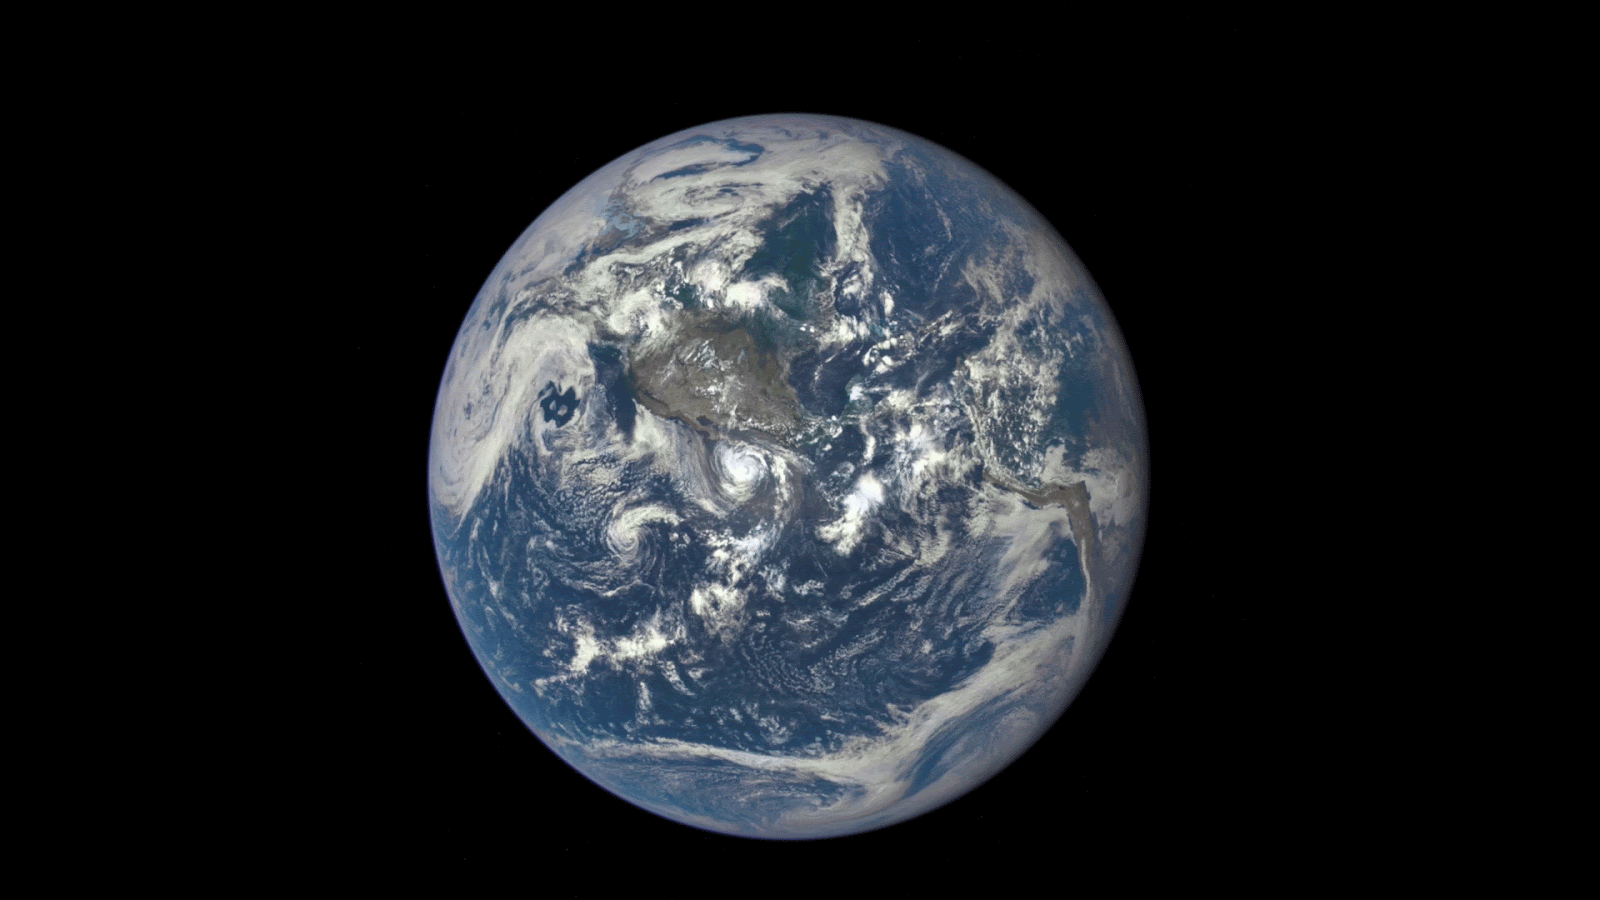 Earth: The Cradle of Life and Our Only Home